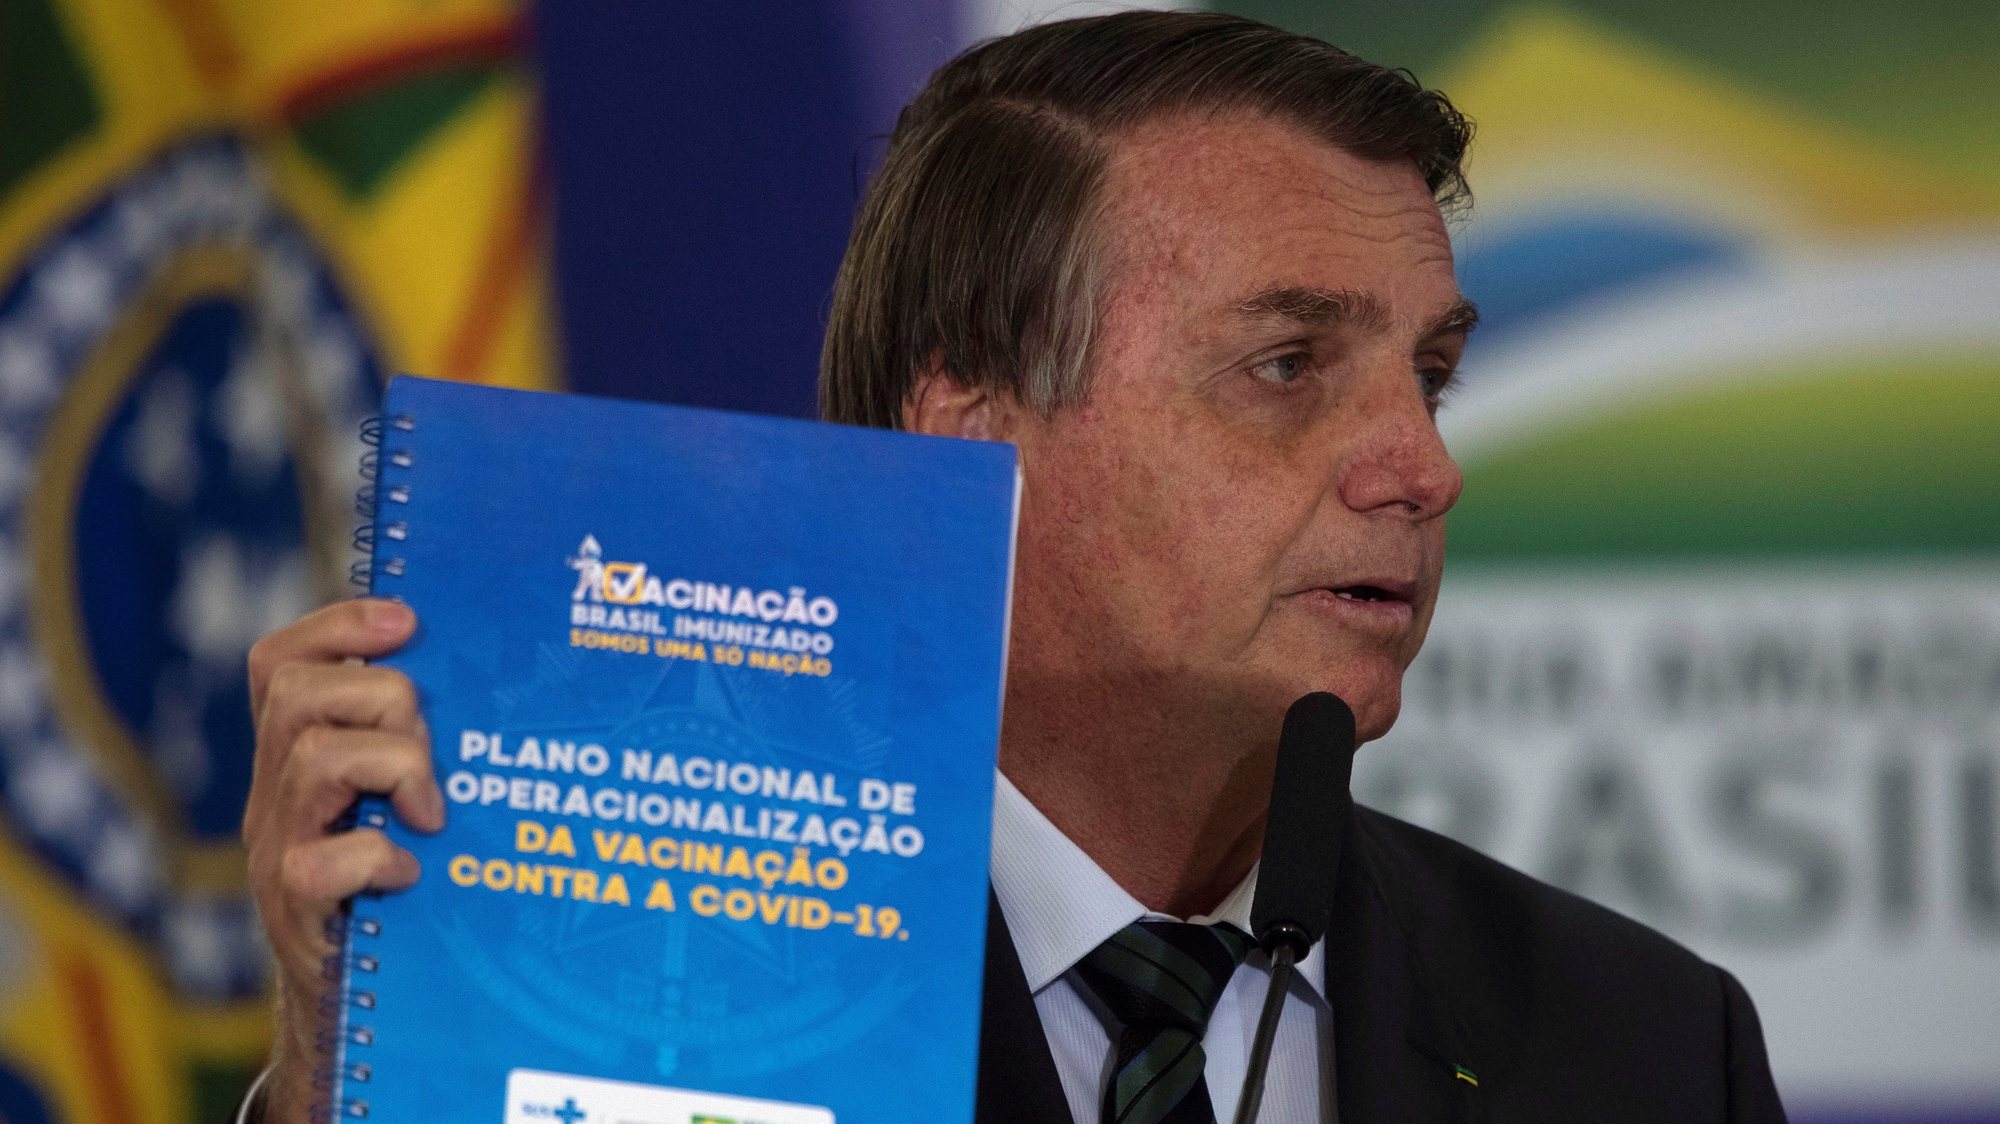 epa08887789 Brazilian President Jair Bolsonaro presents the National Vaccination Plan against covid-19, at the Planalto Palace in Brasilia, Brazil, 16 December 2020. The Brazilian Government presented the master lines of its future vaccination plan against covid-19, which plans to immunize 210 million inhabitants in about 16 months, but has not yet set a start date for the process. According to the Ministry of Health, to establish the day on which the first of the five planned vaccination phases will begin, one must wait for an vaccine to be approved and registered by the National Health Surveillance Agency (Anvisa), which could occur for next February.  EPA/Joedson Alves